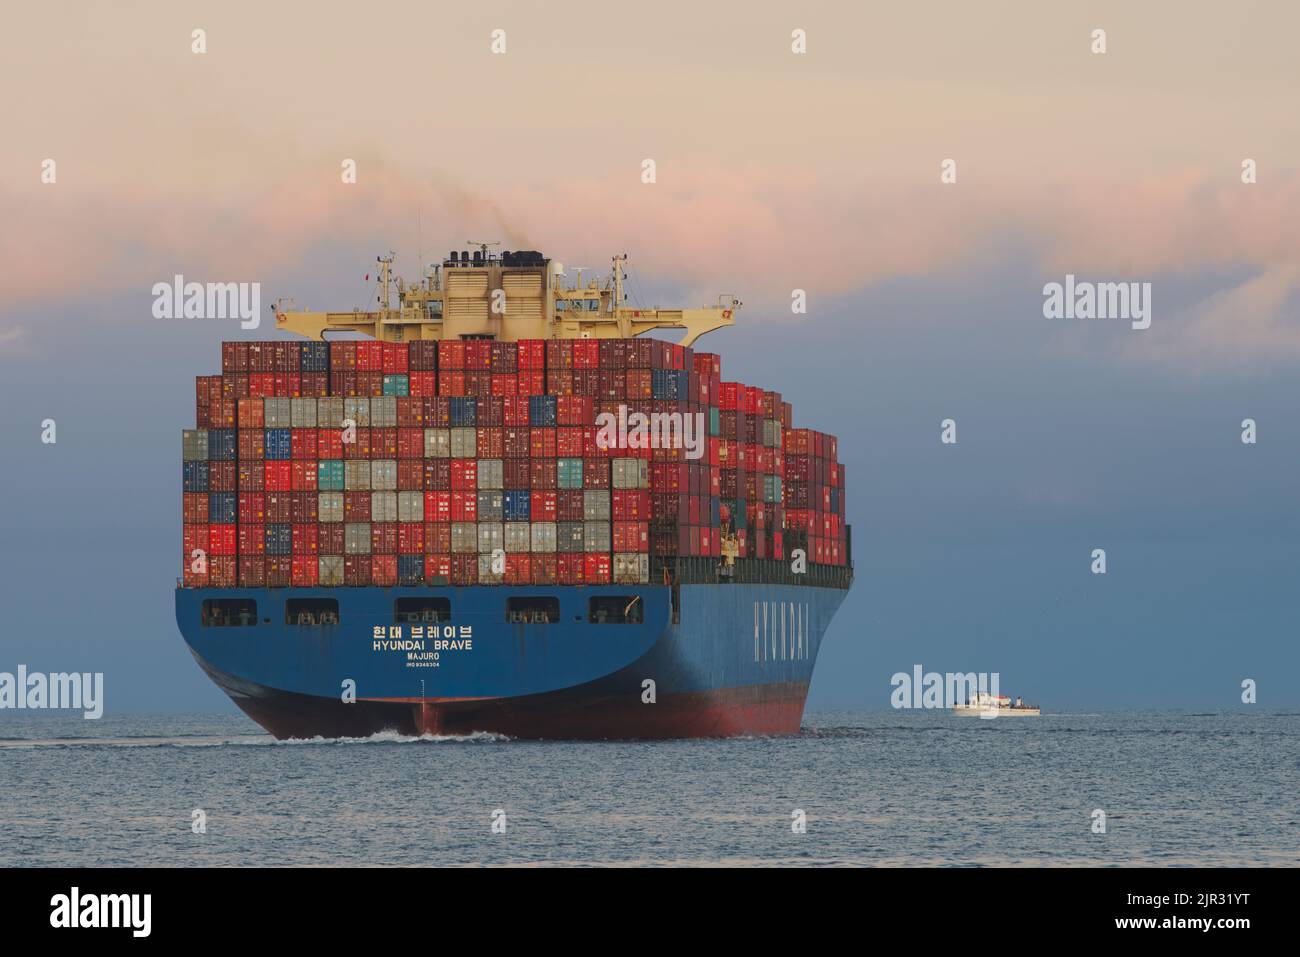 Hyundai container ship shown leaving the Port of Los Angeles, and a small cruise boat in the Los Angeles Harbor, California, USA, on August 17, 2019. Stock Photo